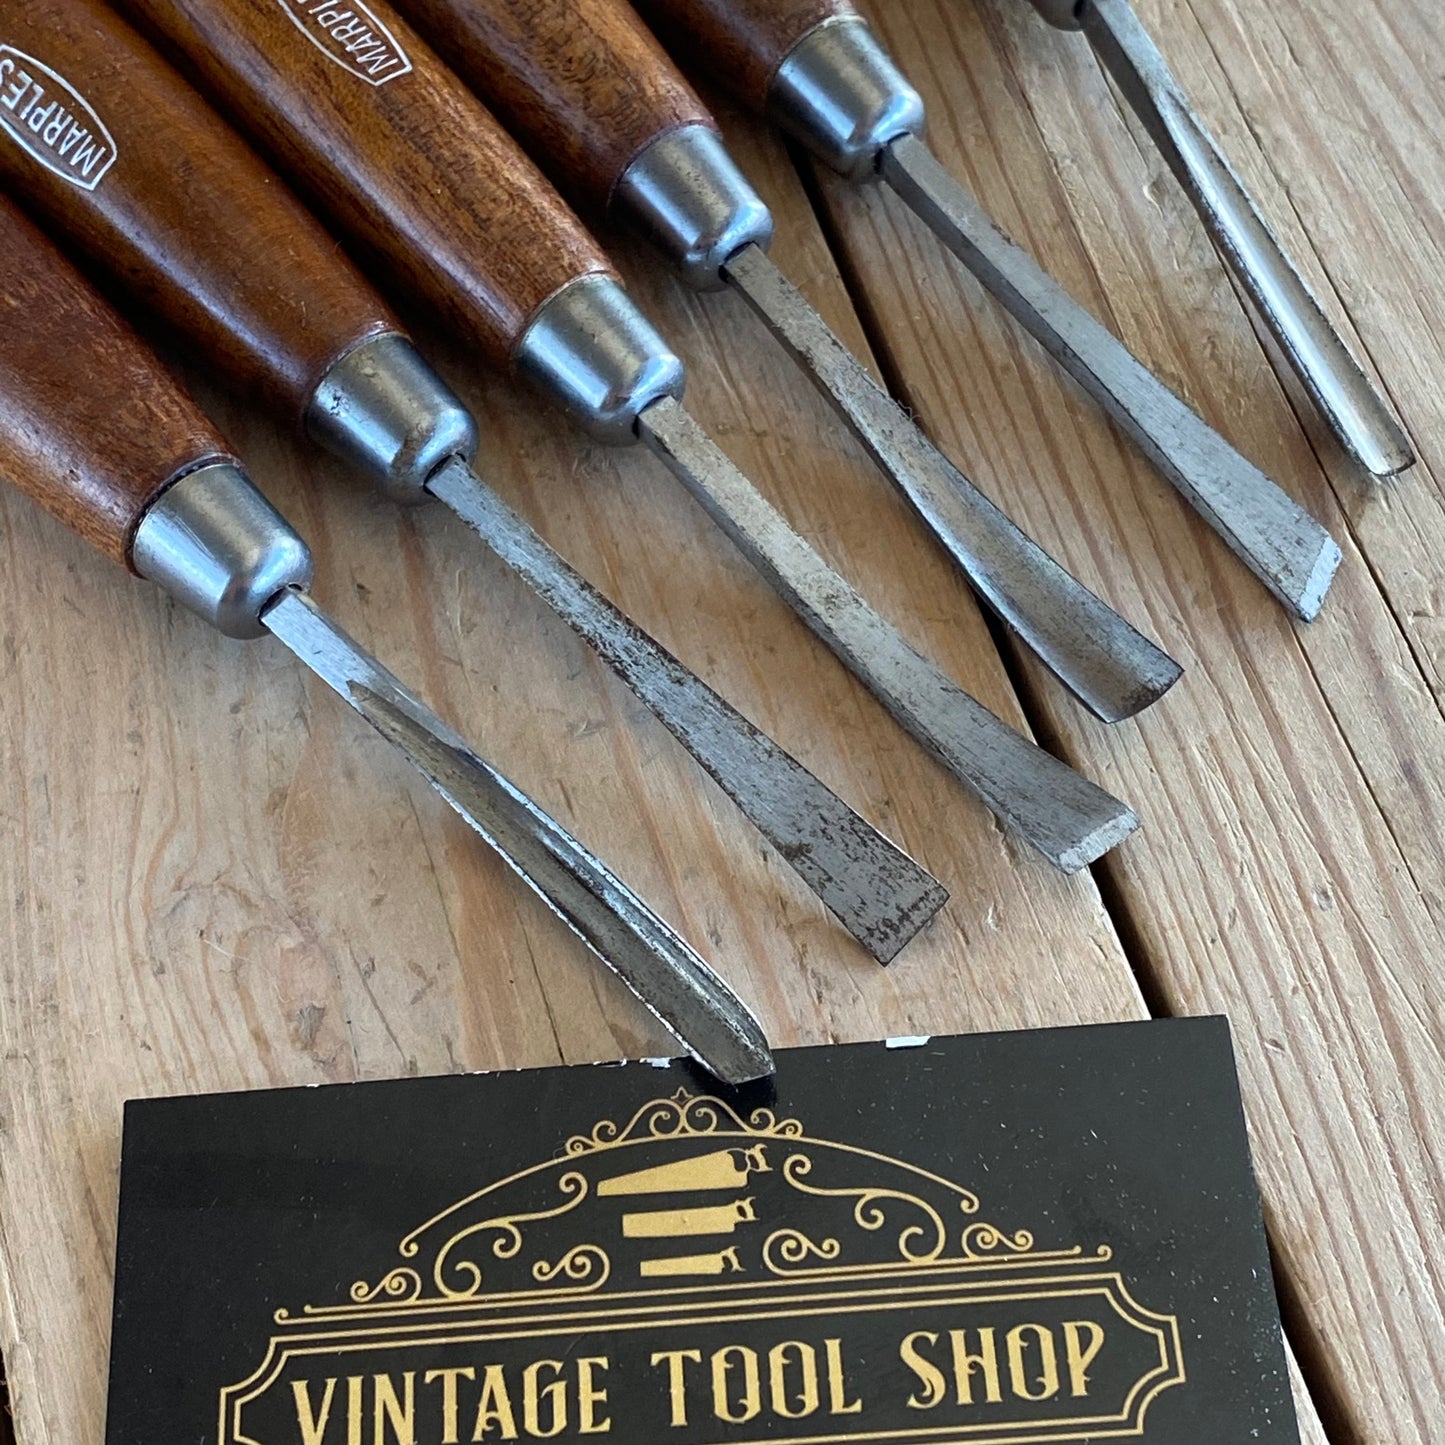 SOLD Vintage set of 6 MARPLES England Carving CHISELS No.153 unused in box T7816